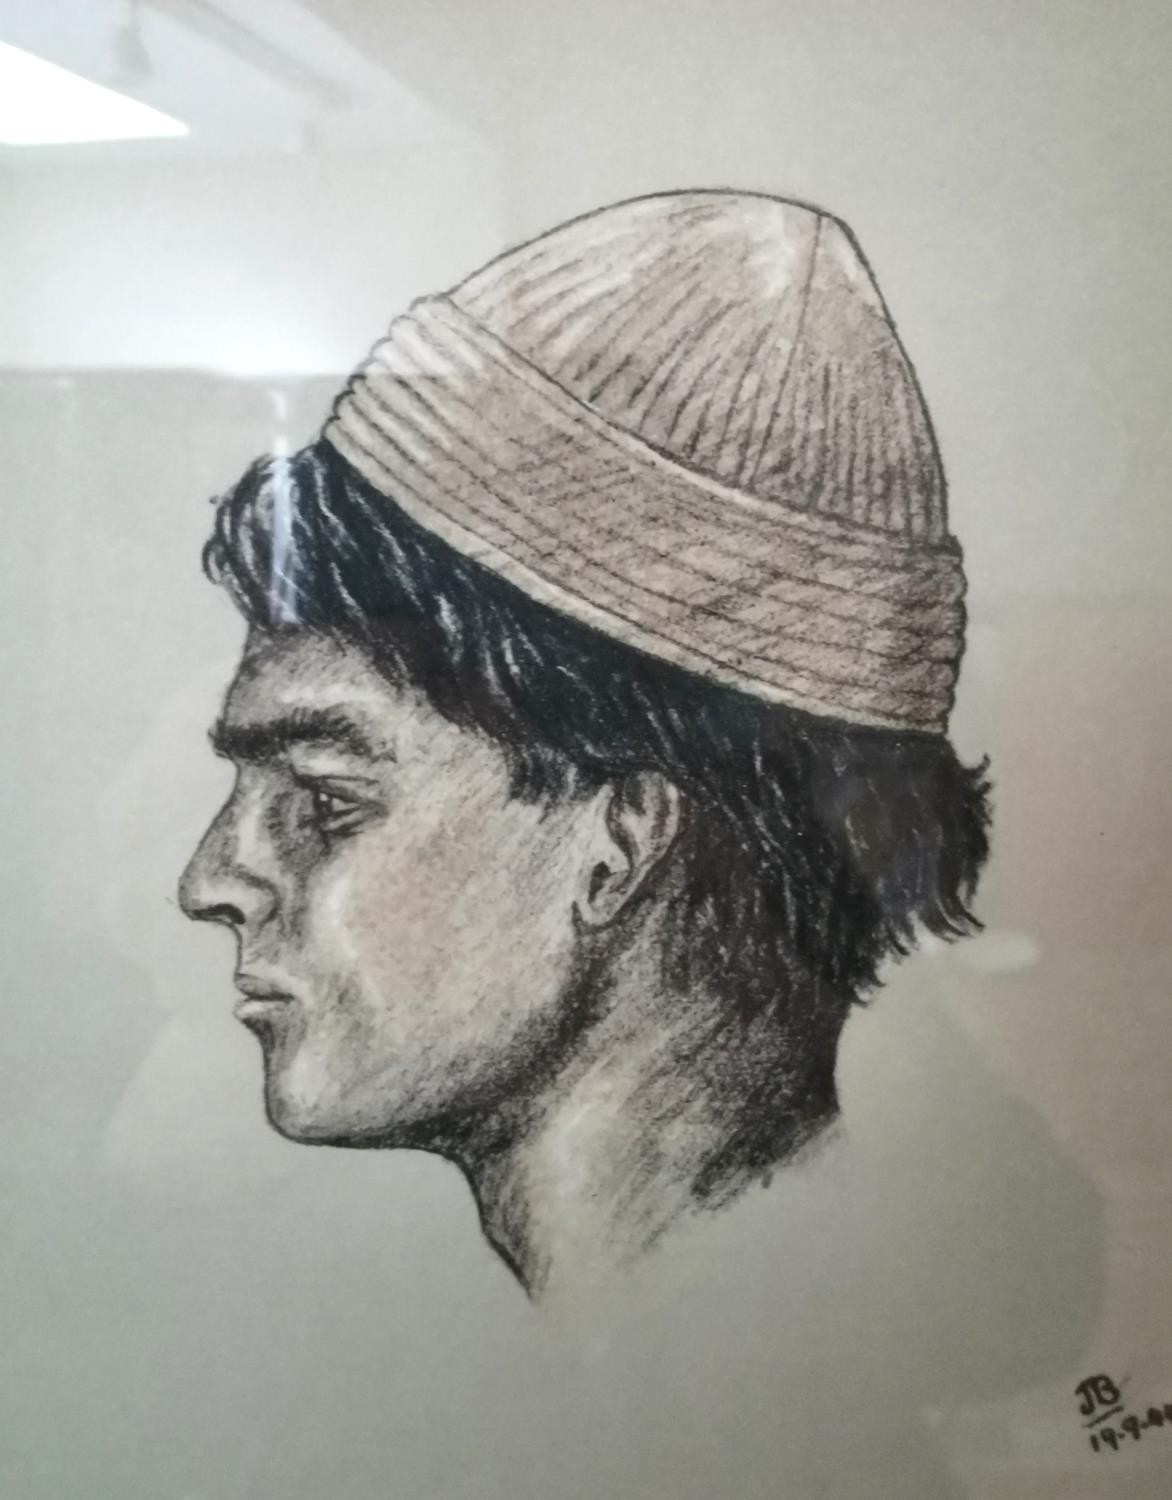 J. Bowen, artists proof lithograph of 'The boy in the red hat', from a series of drawings done while - Image 4 of 7